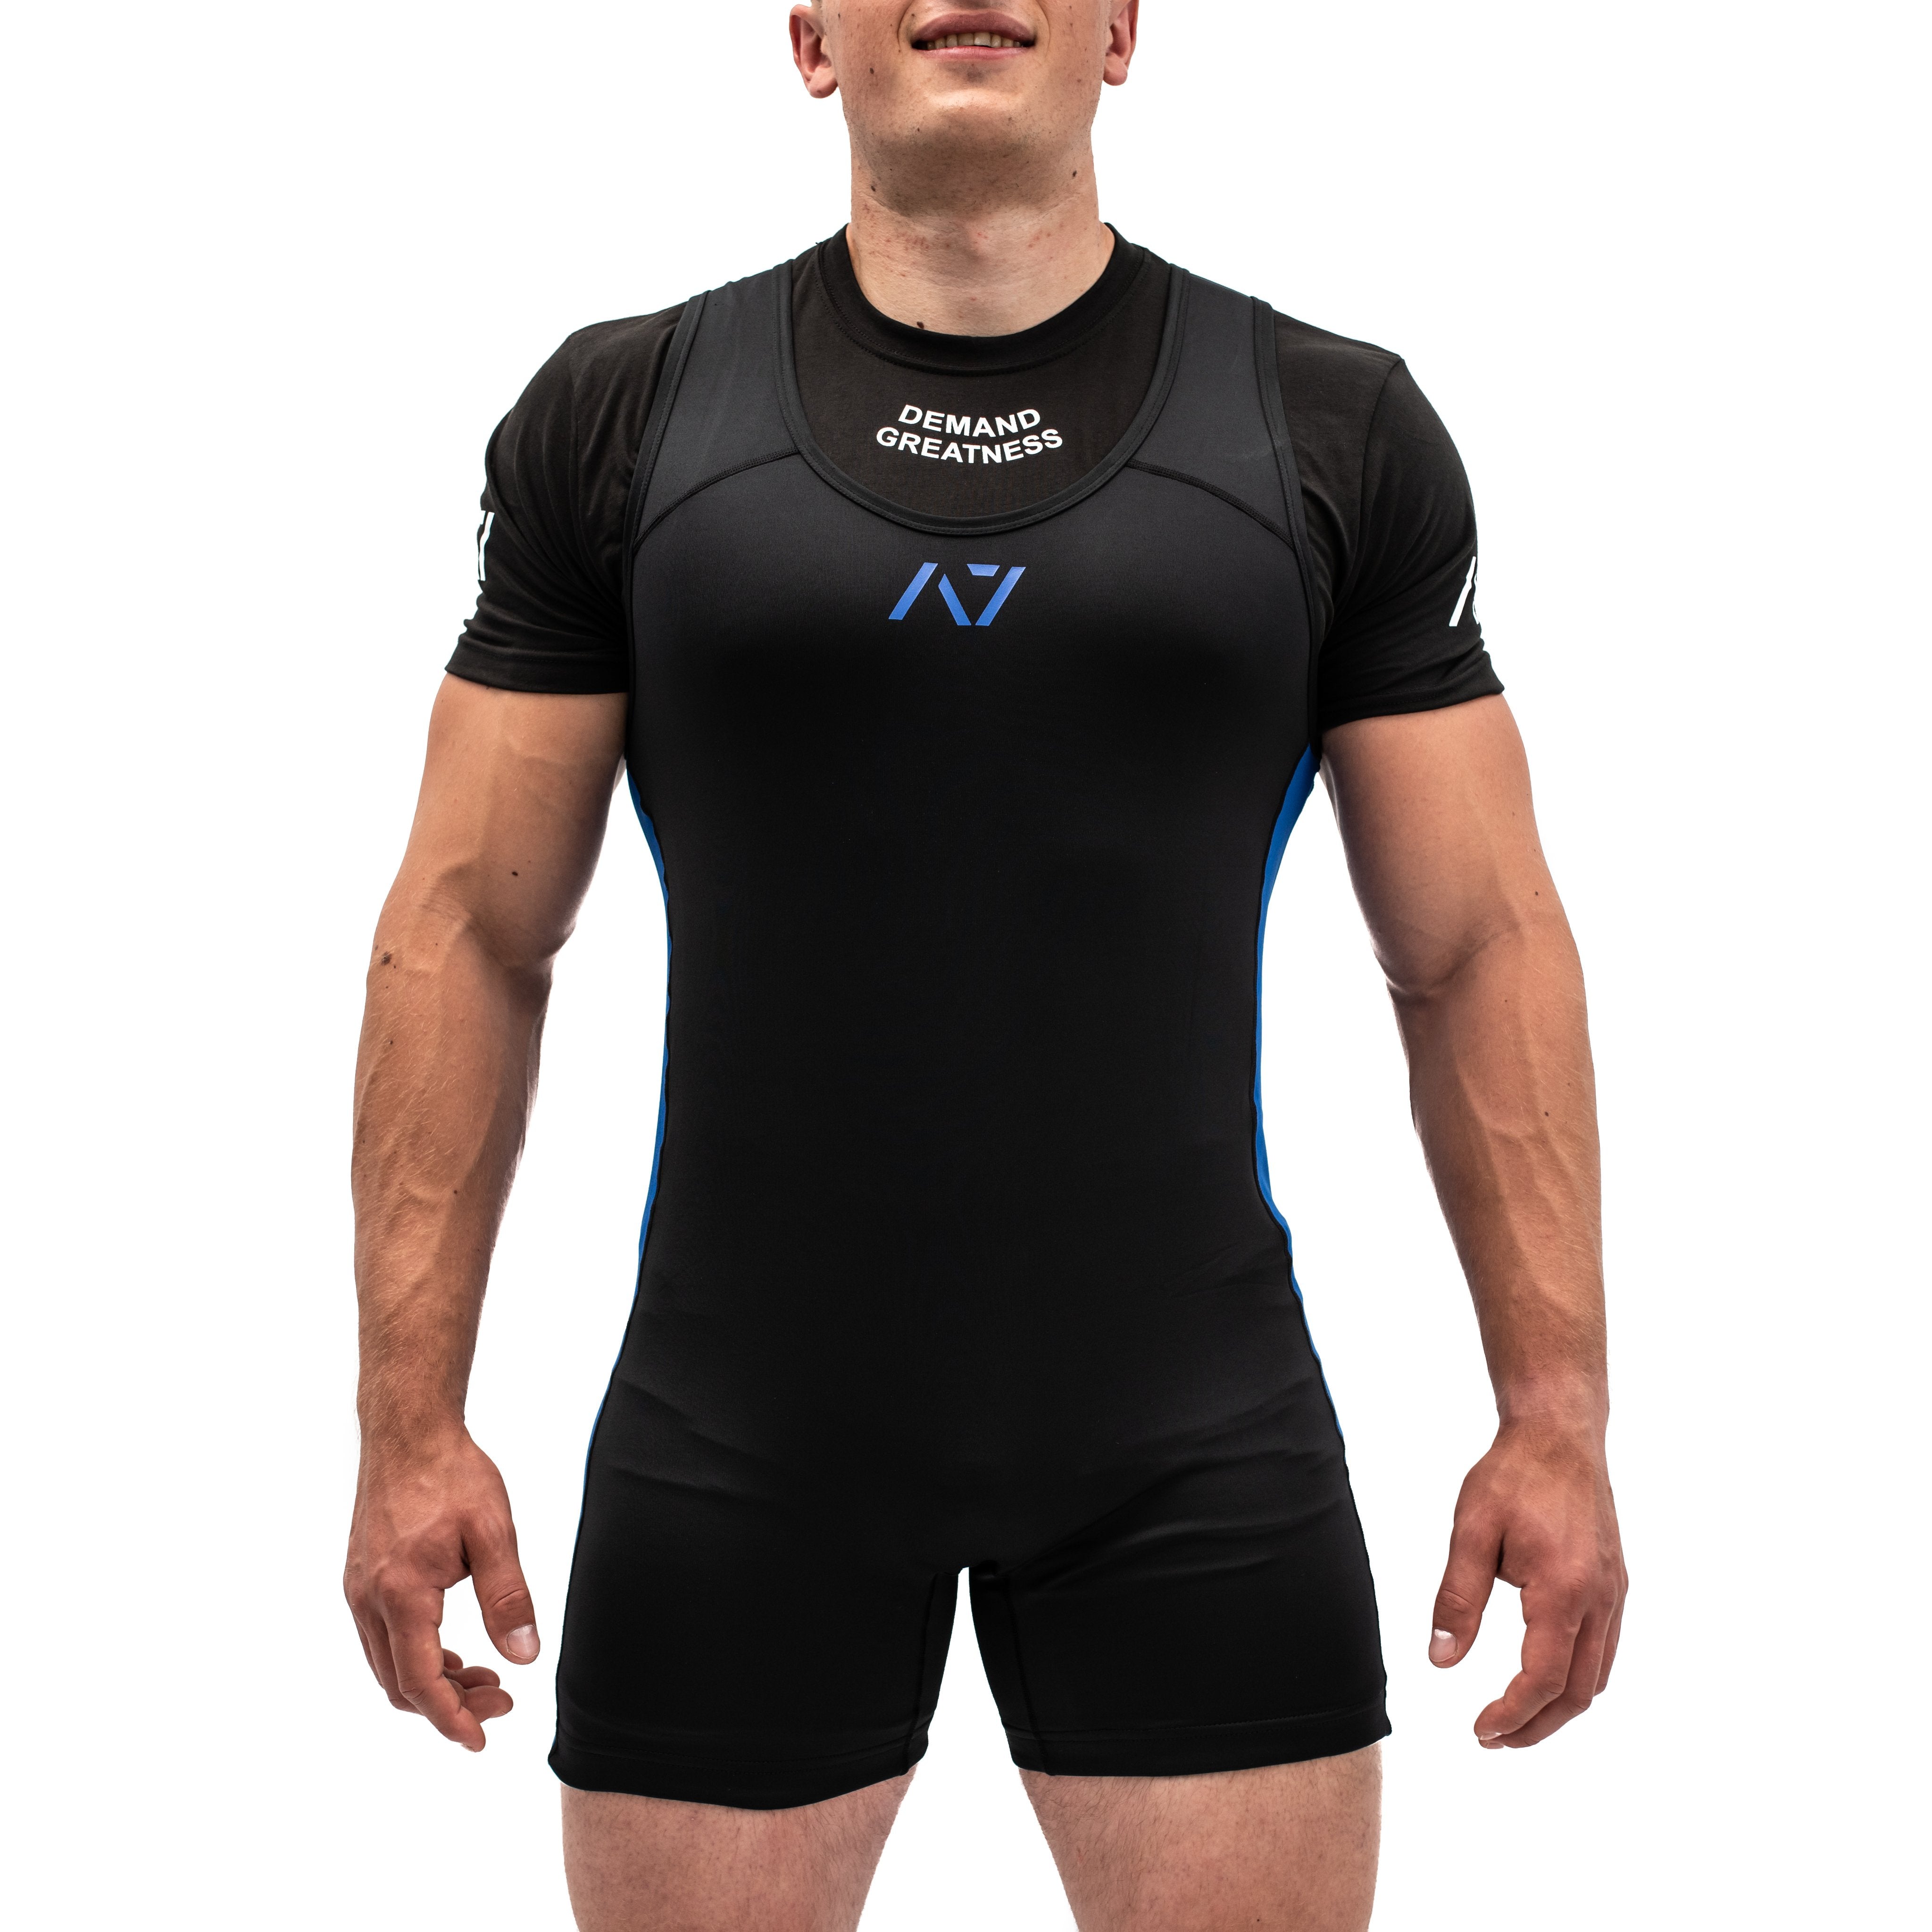 A7 IPF Approved Powerlifting Singlet is designed exclusively for powerlifting. It is very comfortable to wear and feels soft on bare skin. A7 Powerlifting Singlet is made from breathable fabric and provides compression during your lifts. The perfect piece of IPF Approved Kit! Shipping to UK and Norway!